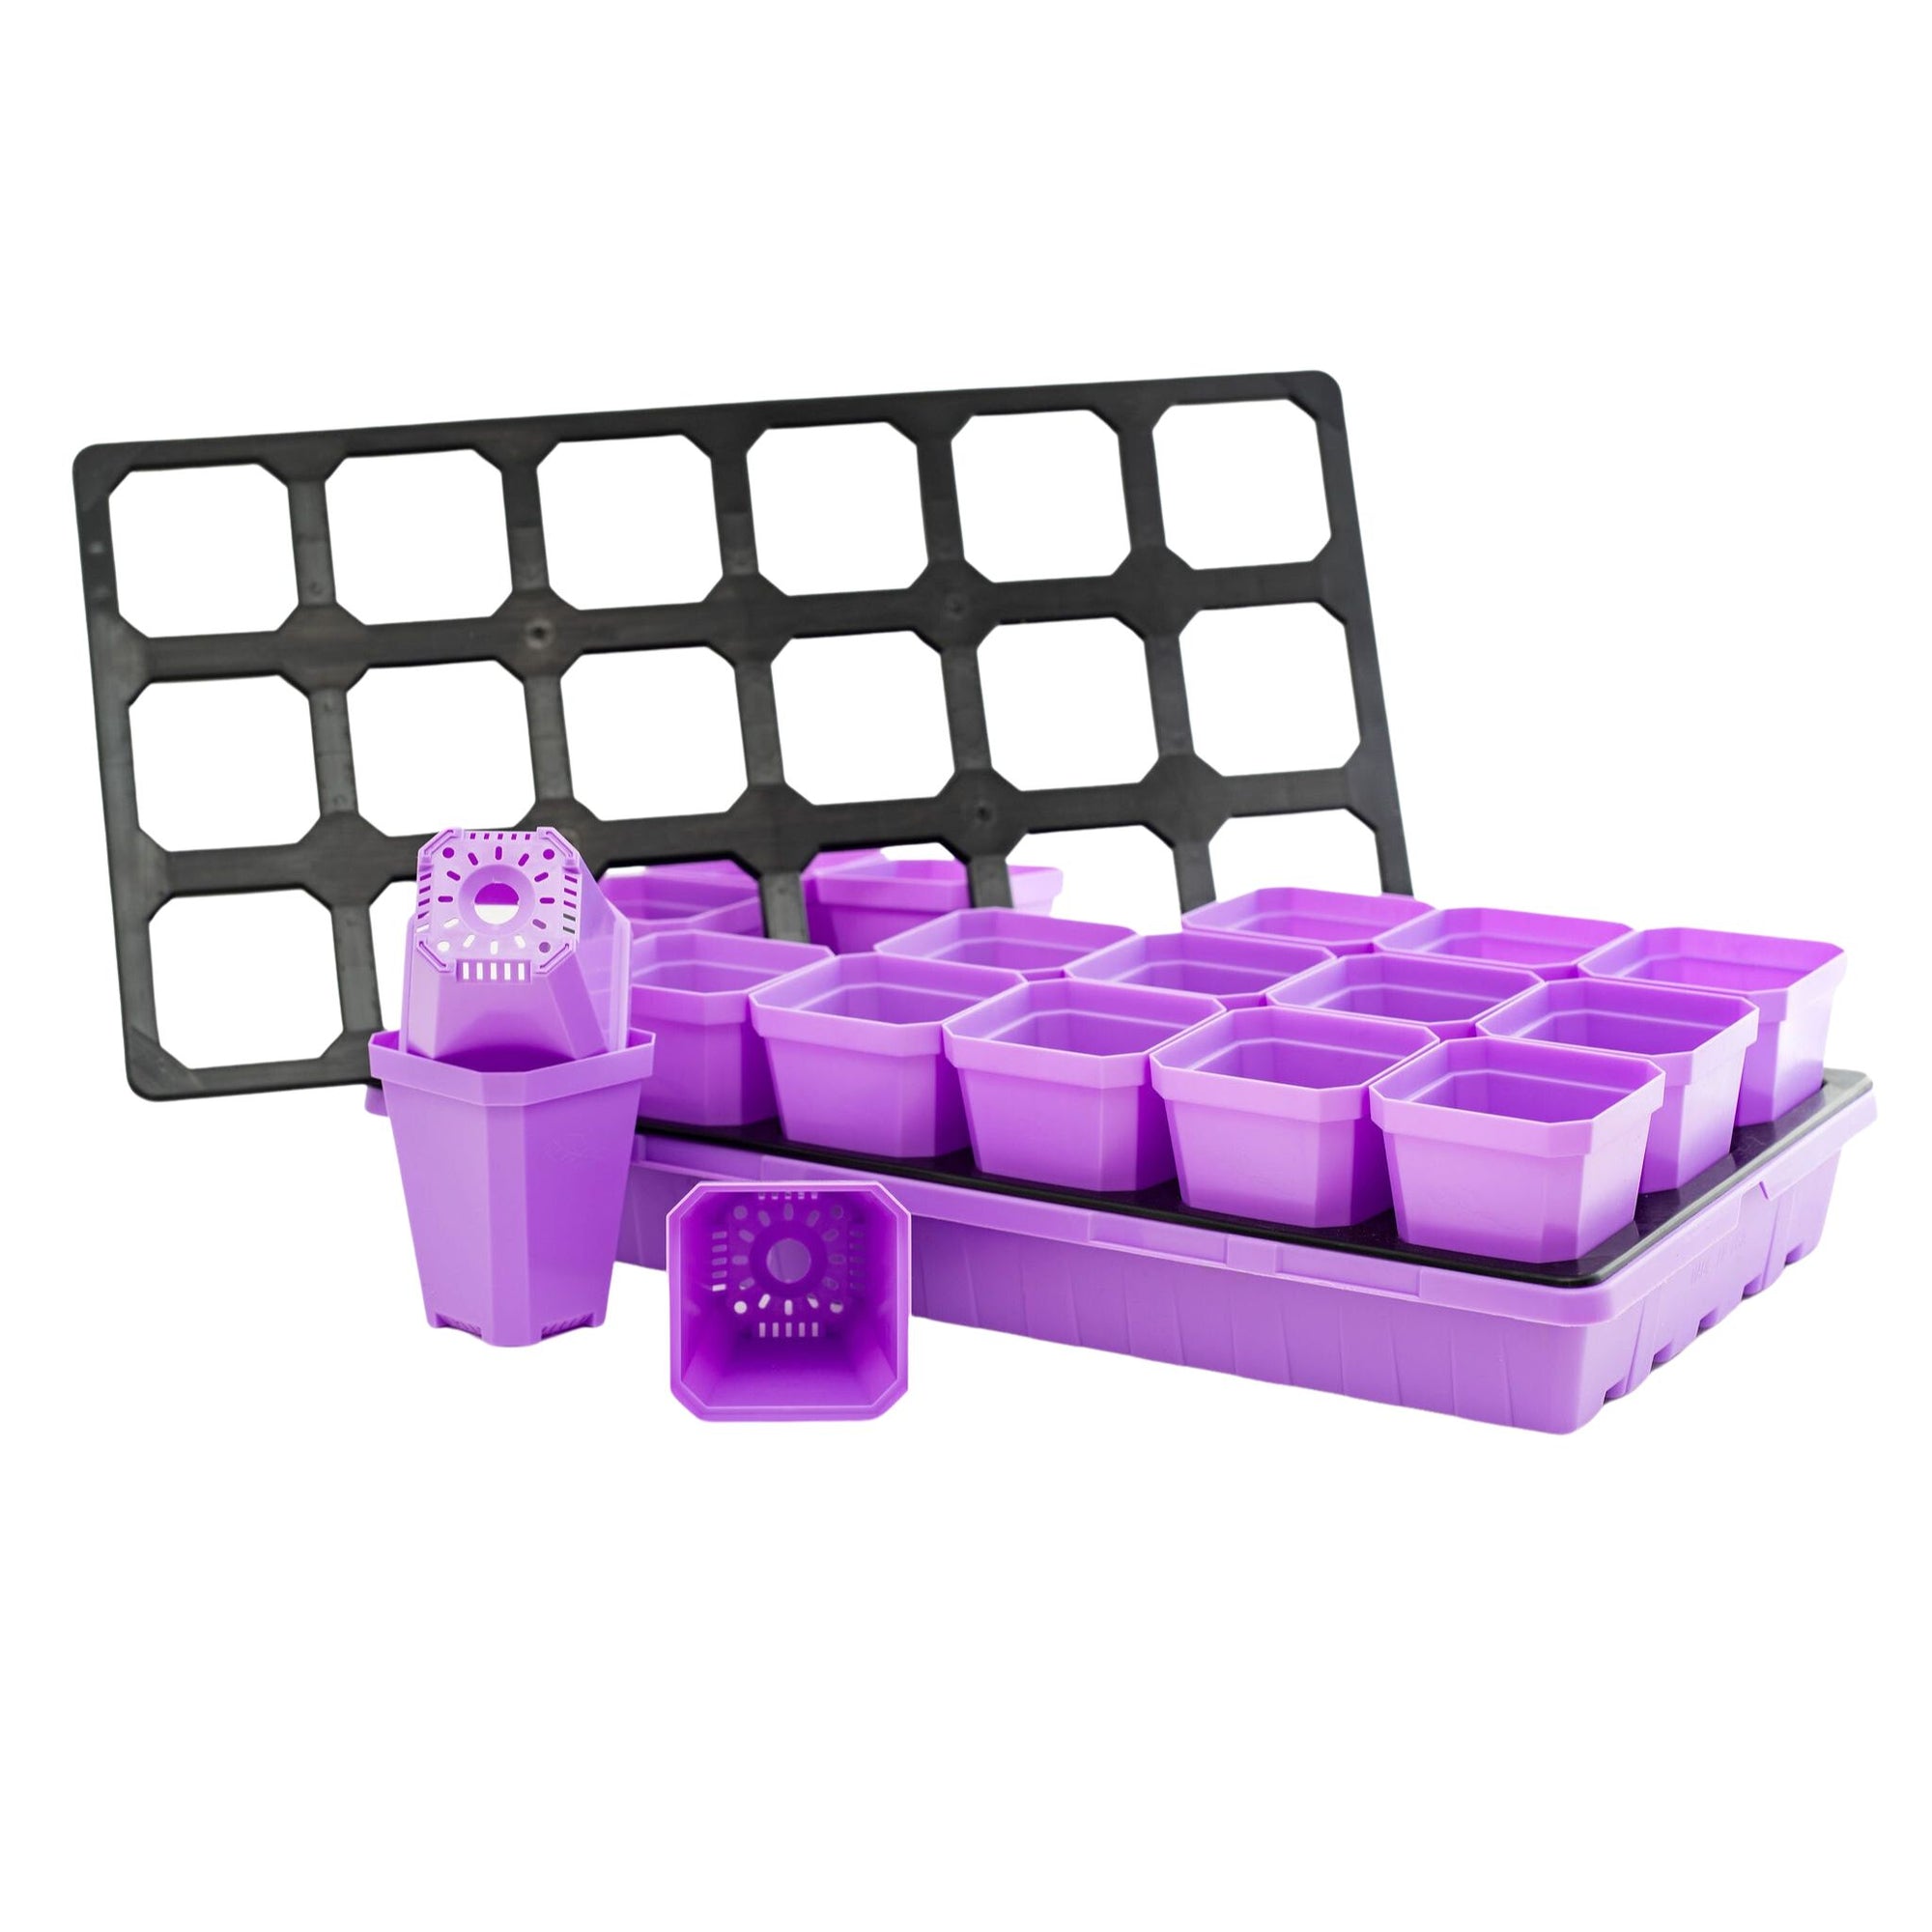 Purple 3.3" Seed Starting Pot with Insert and 1020 purple tray